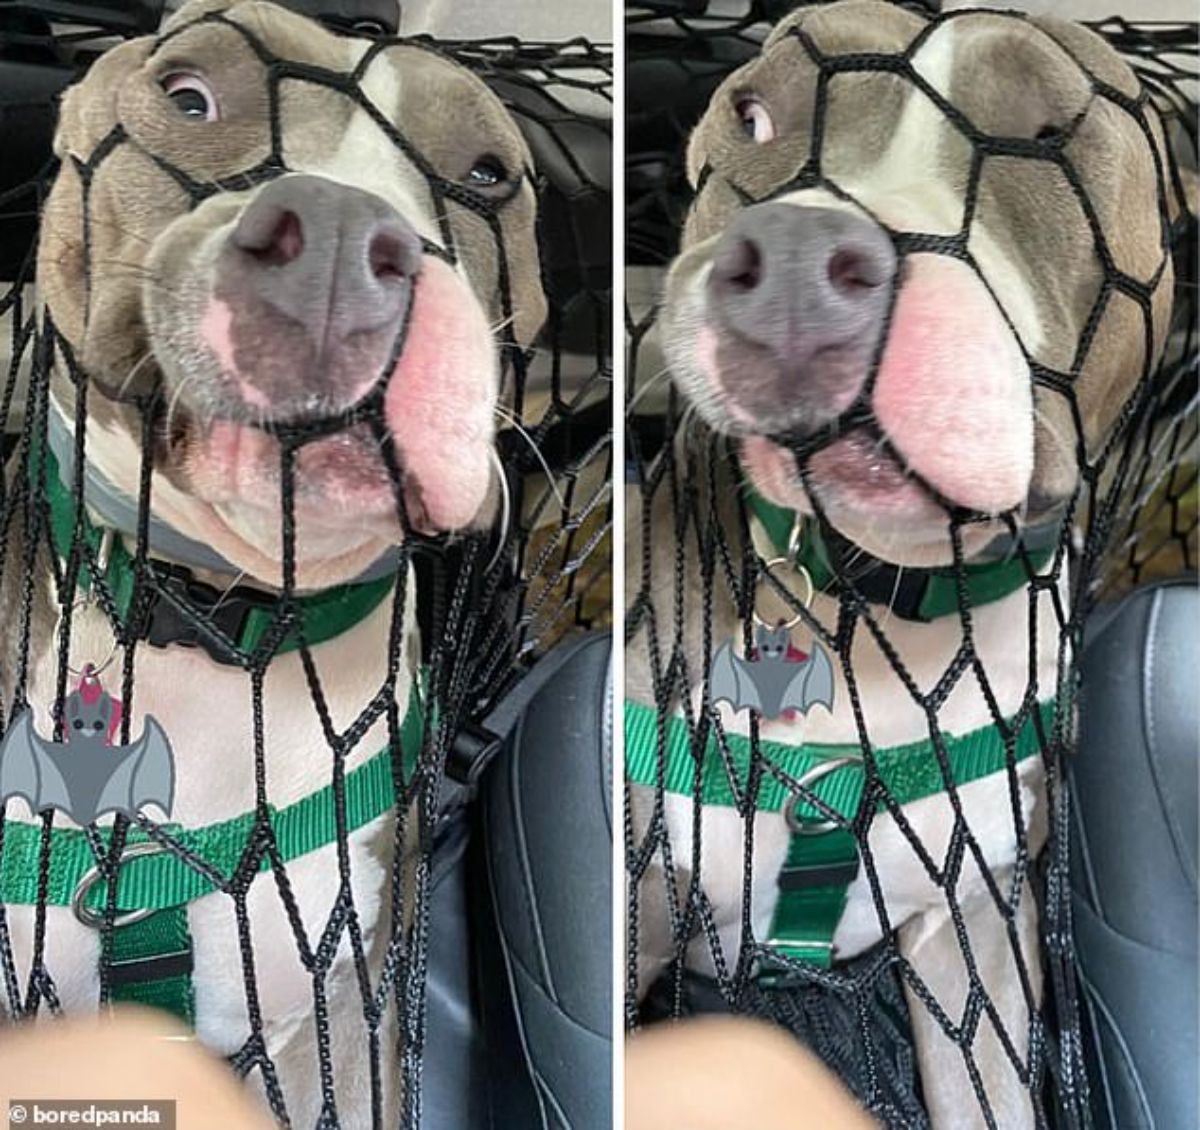 2 photos of a grey and white pitbull pushing its face against a black netting inside a car